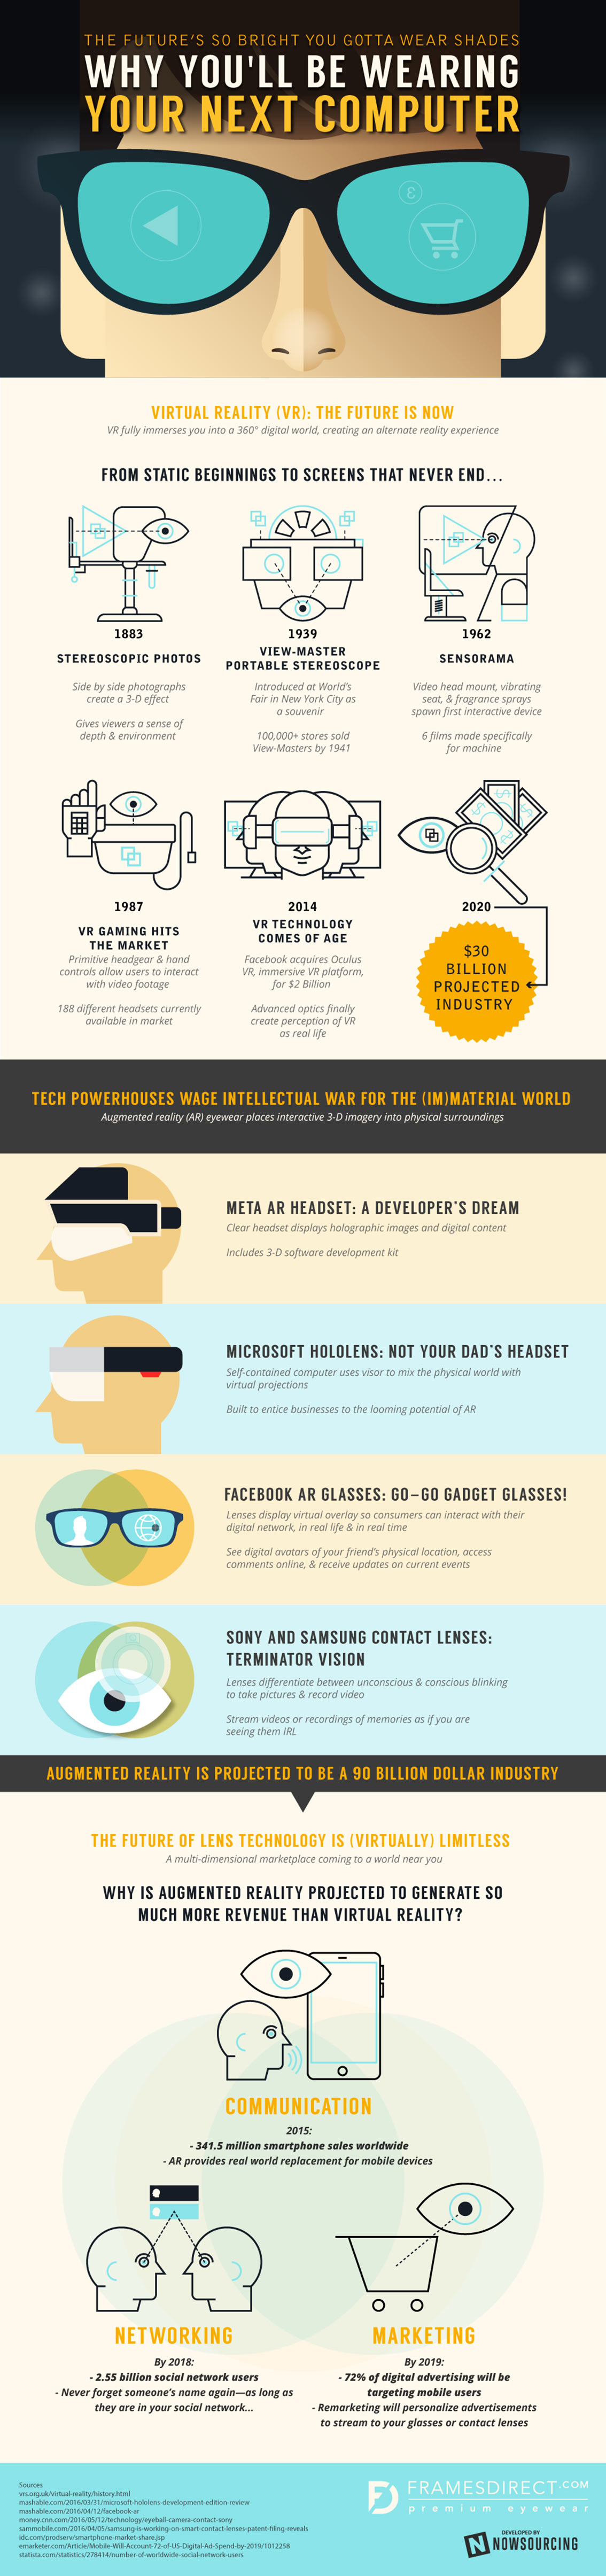 Virtual Reality Wearing Your Next Computer Gadget Infographic